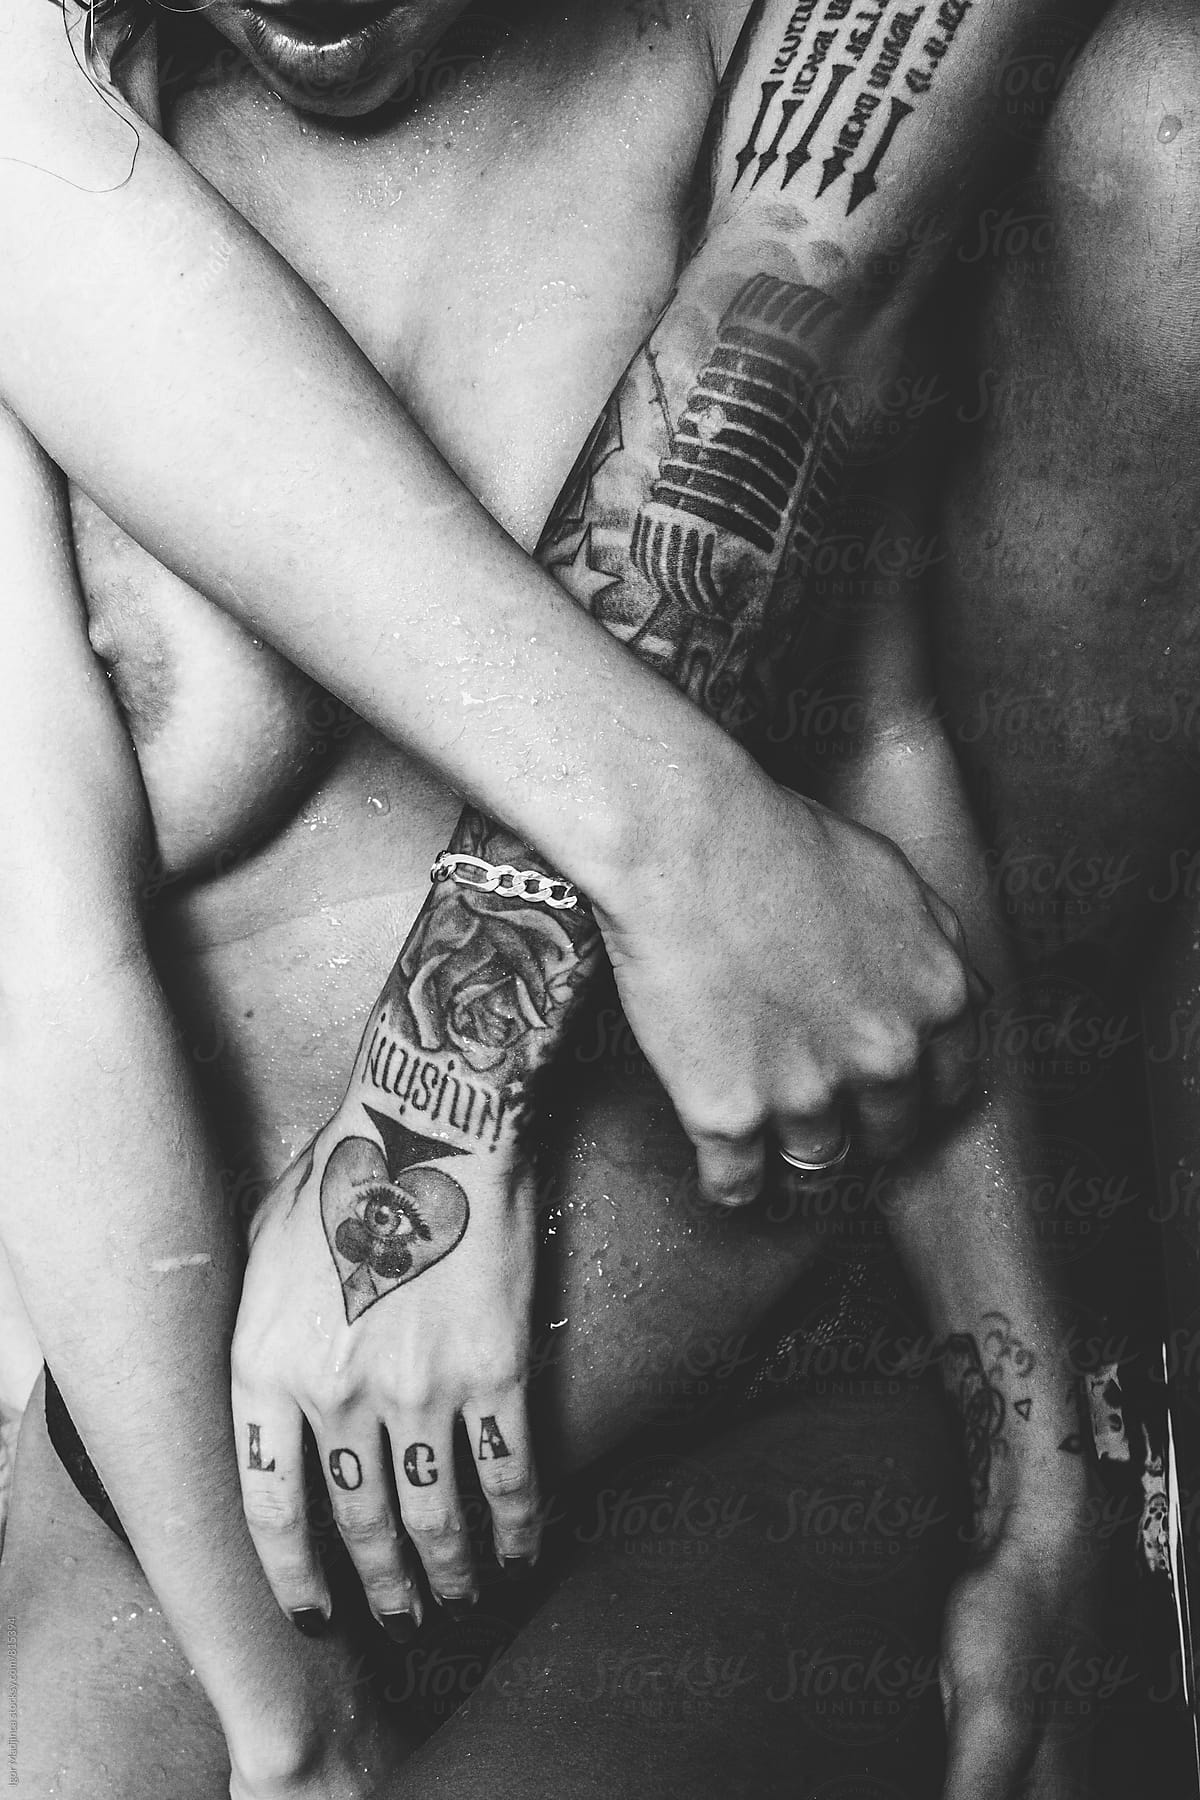 detail, two naked tattooed girls in a tub